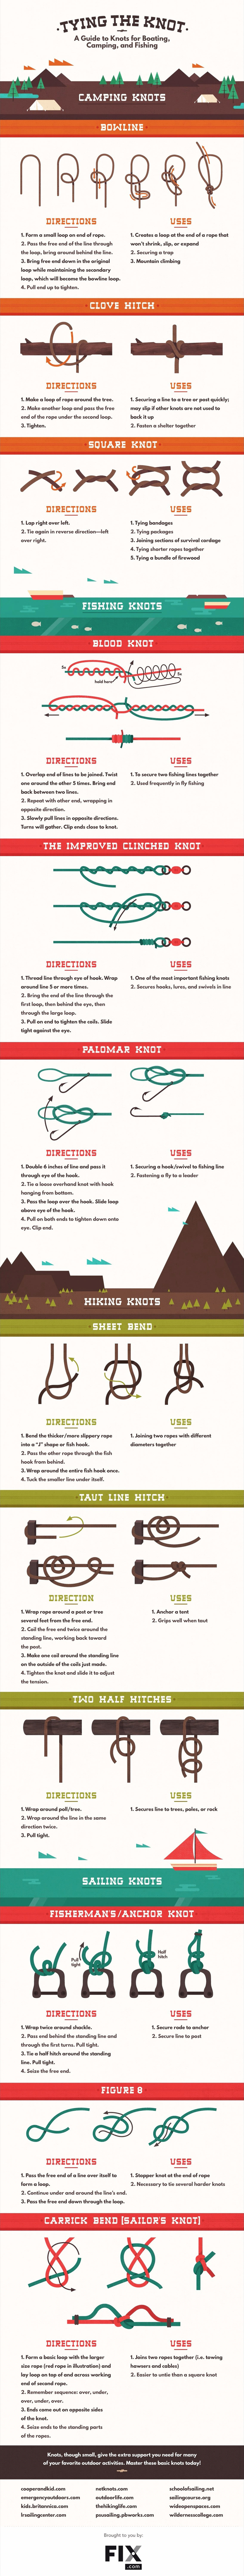 How to Tie Knots in Rope - Camping Infographic